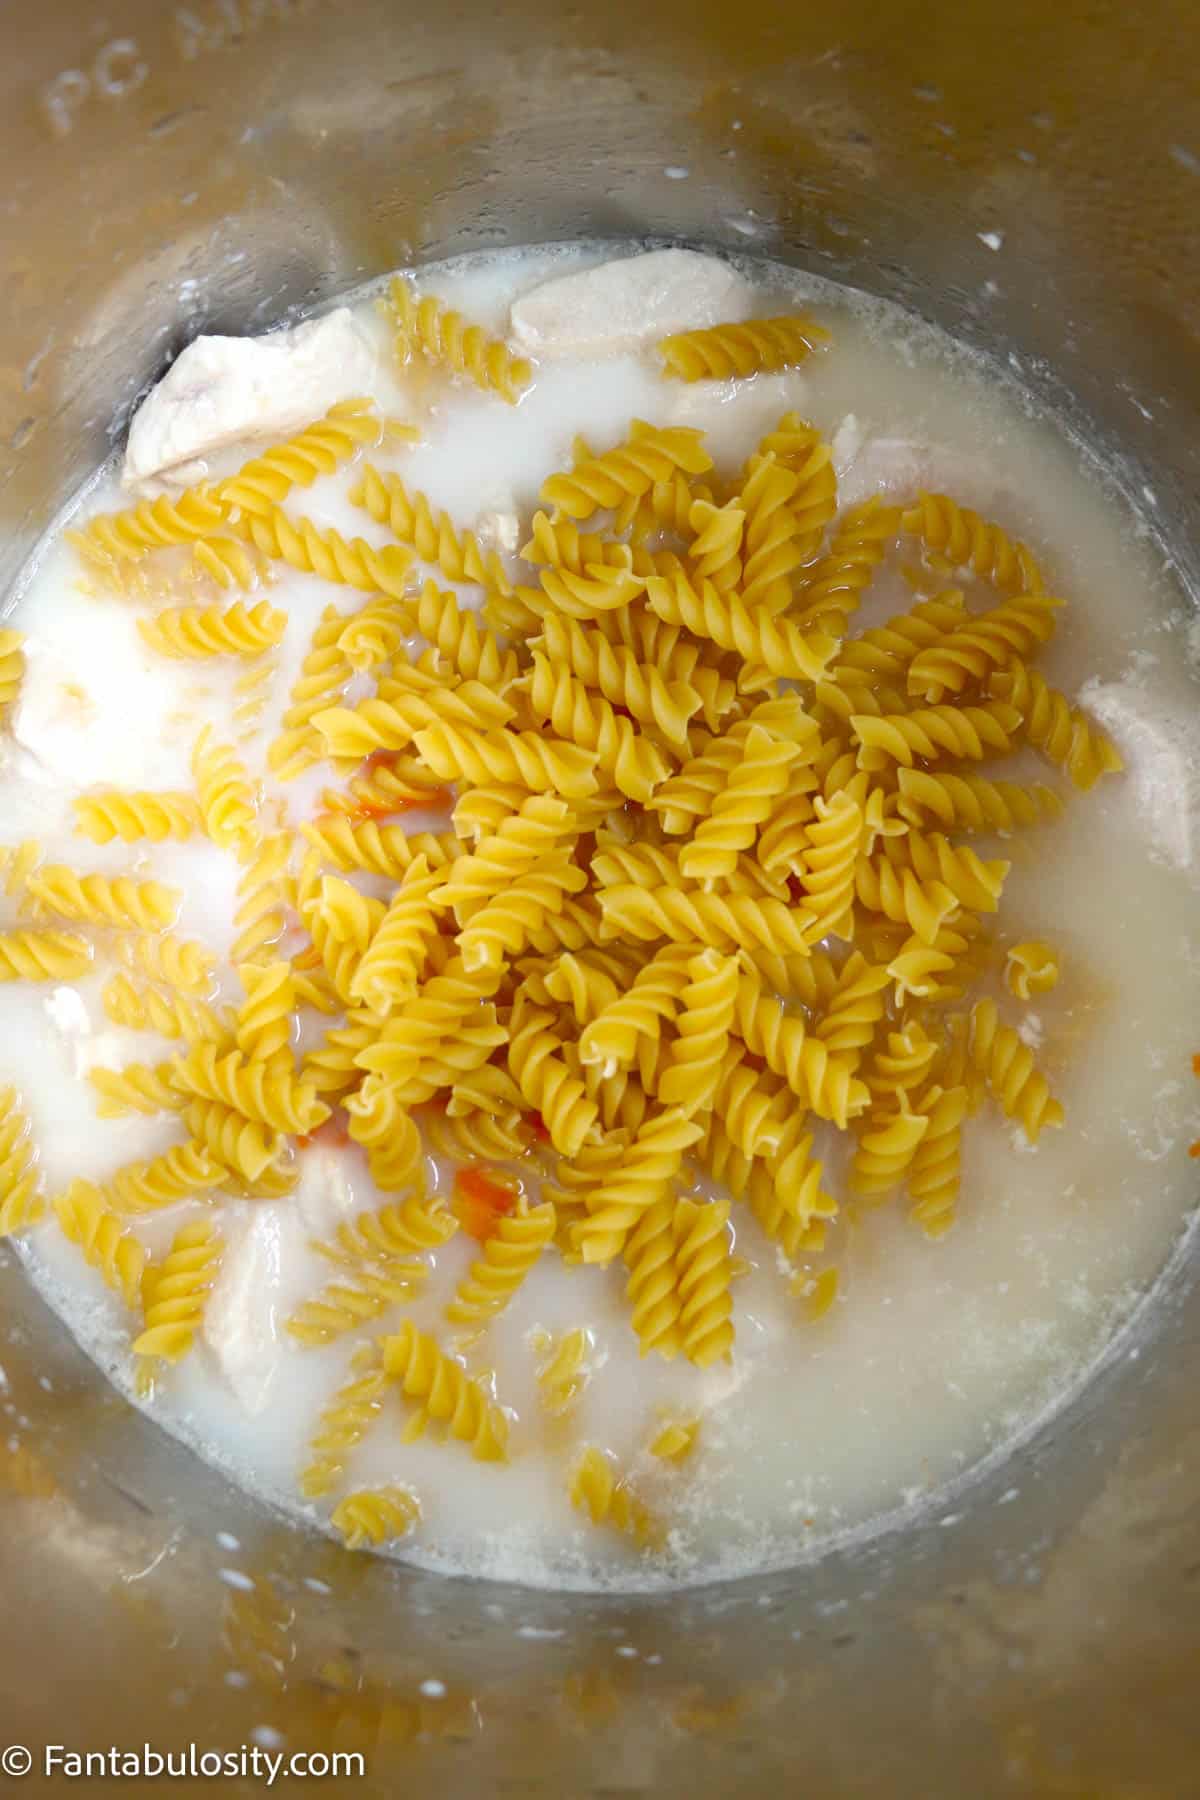 Uncooked pasta in the Instant Pot with the other ingredients.